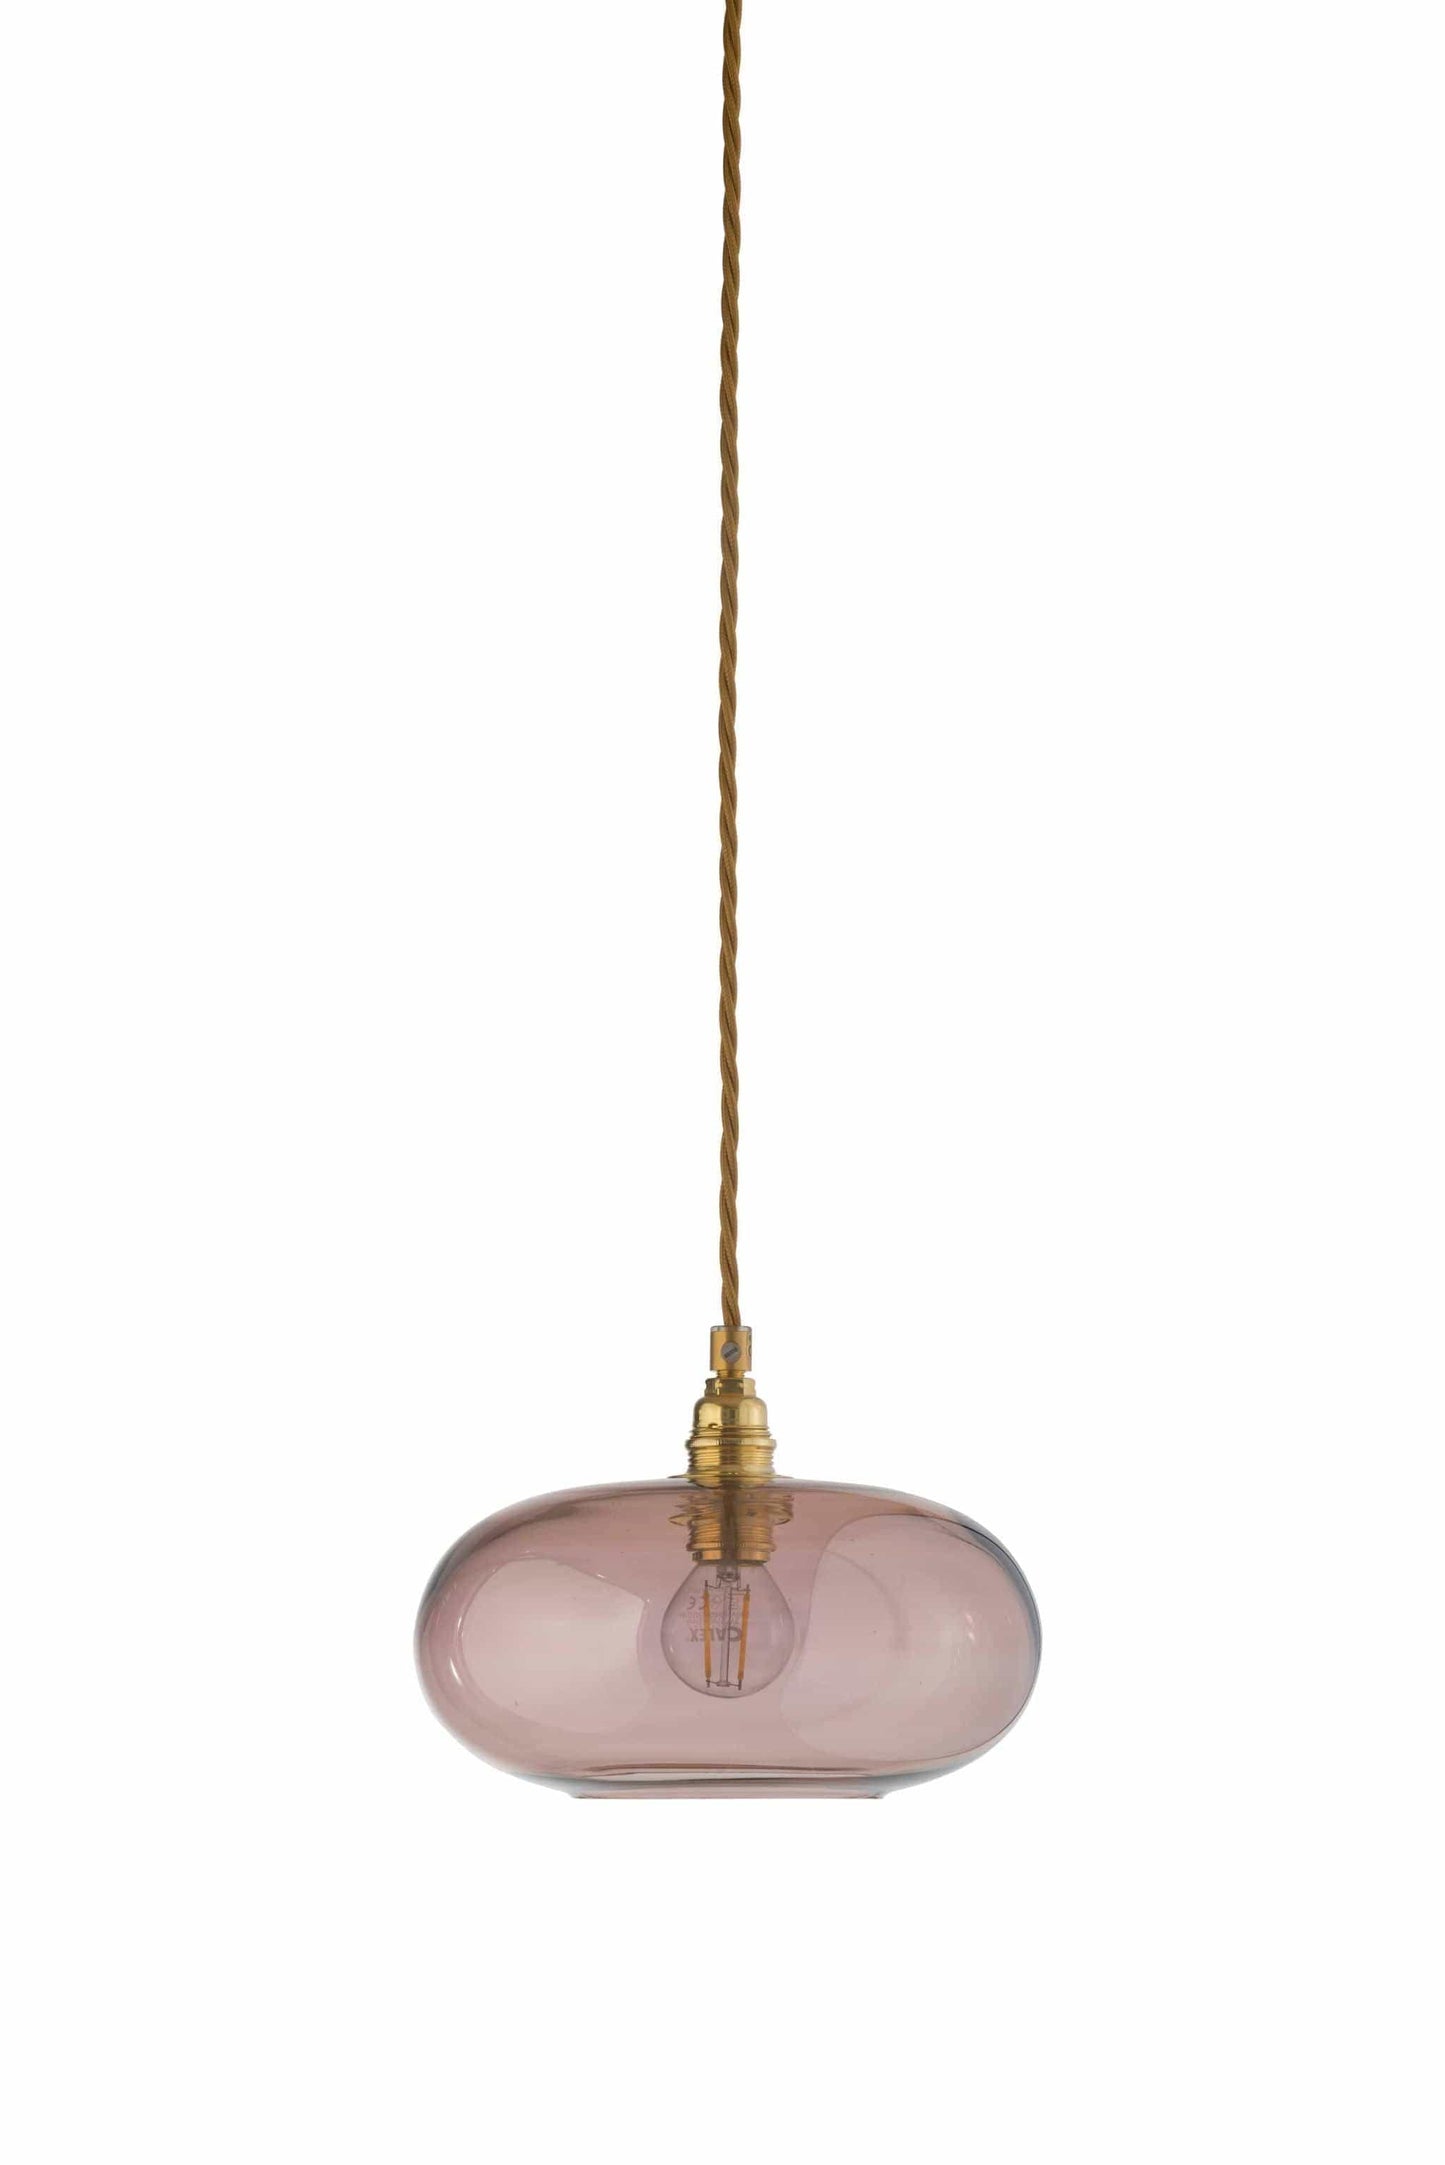 Ebb&Flow Pendant lights Obsidian with gold fittings Horizon Mouth-Blown Glass Pendant Light, small